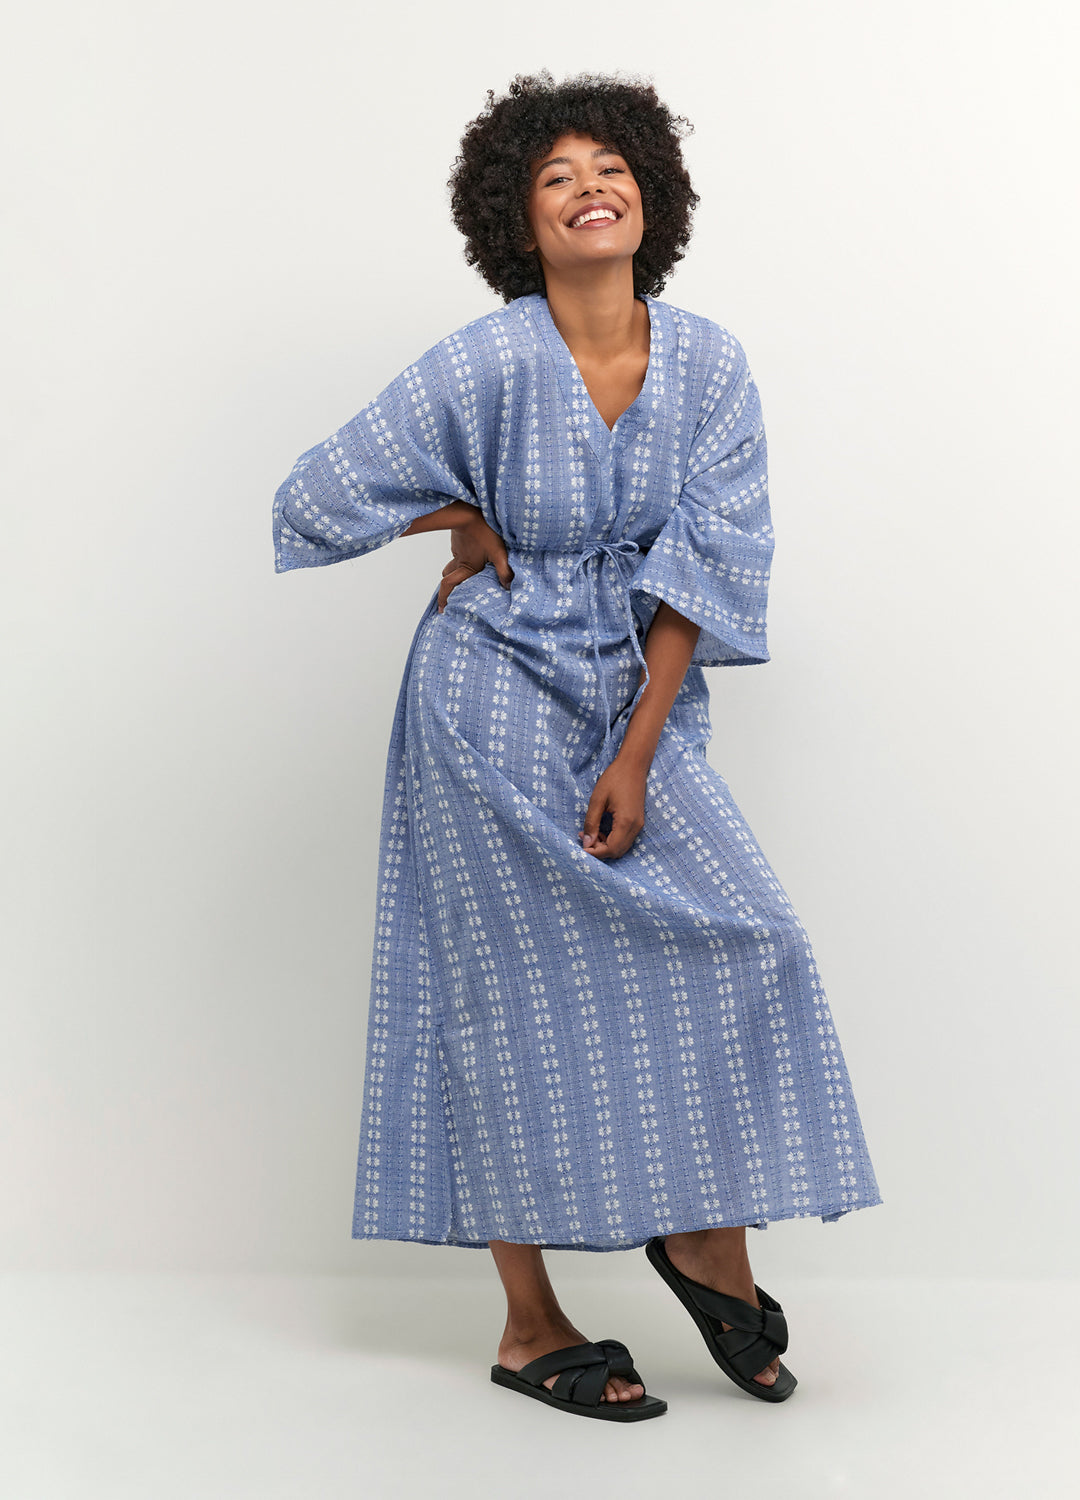 Alternate front view of the Culture Adriette Dress in Ultramarine blue pattern with a loose, flowy silhouette at Inner Beach Co, Toronto, Ontario, Canada